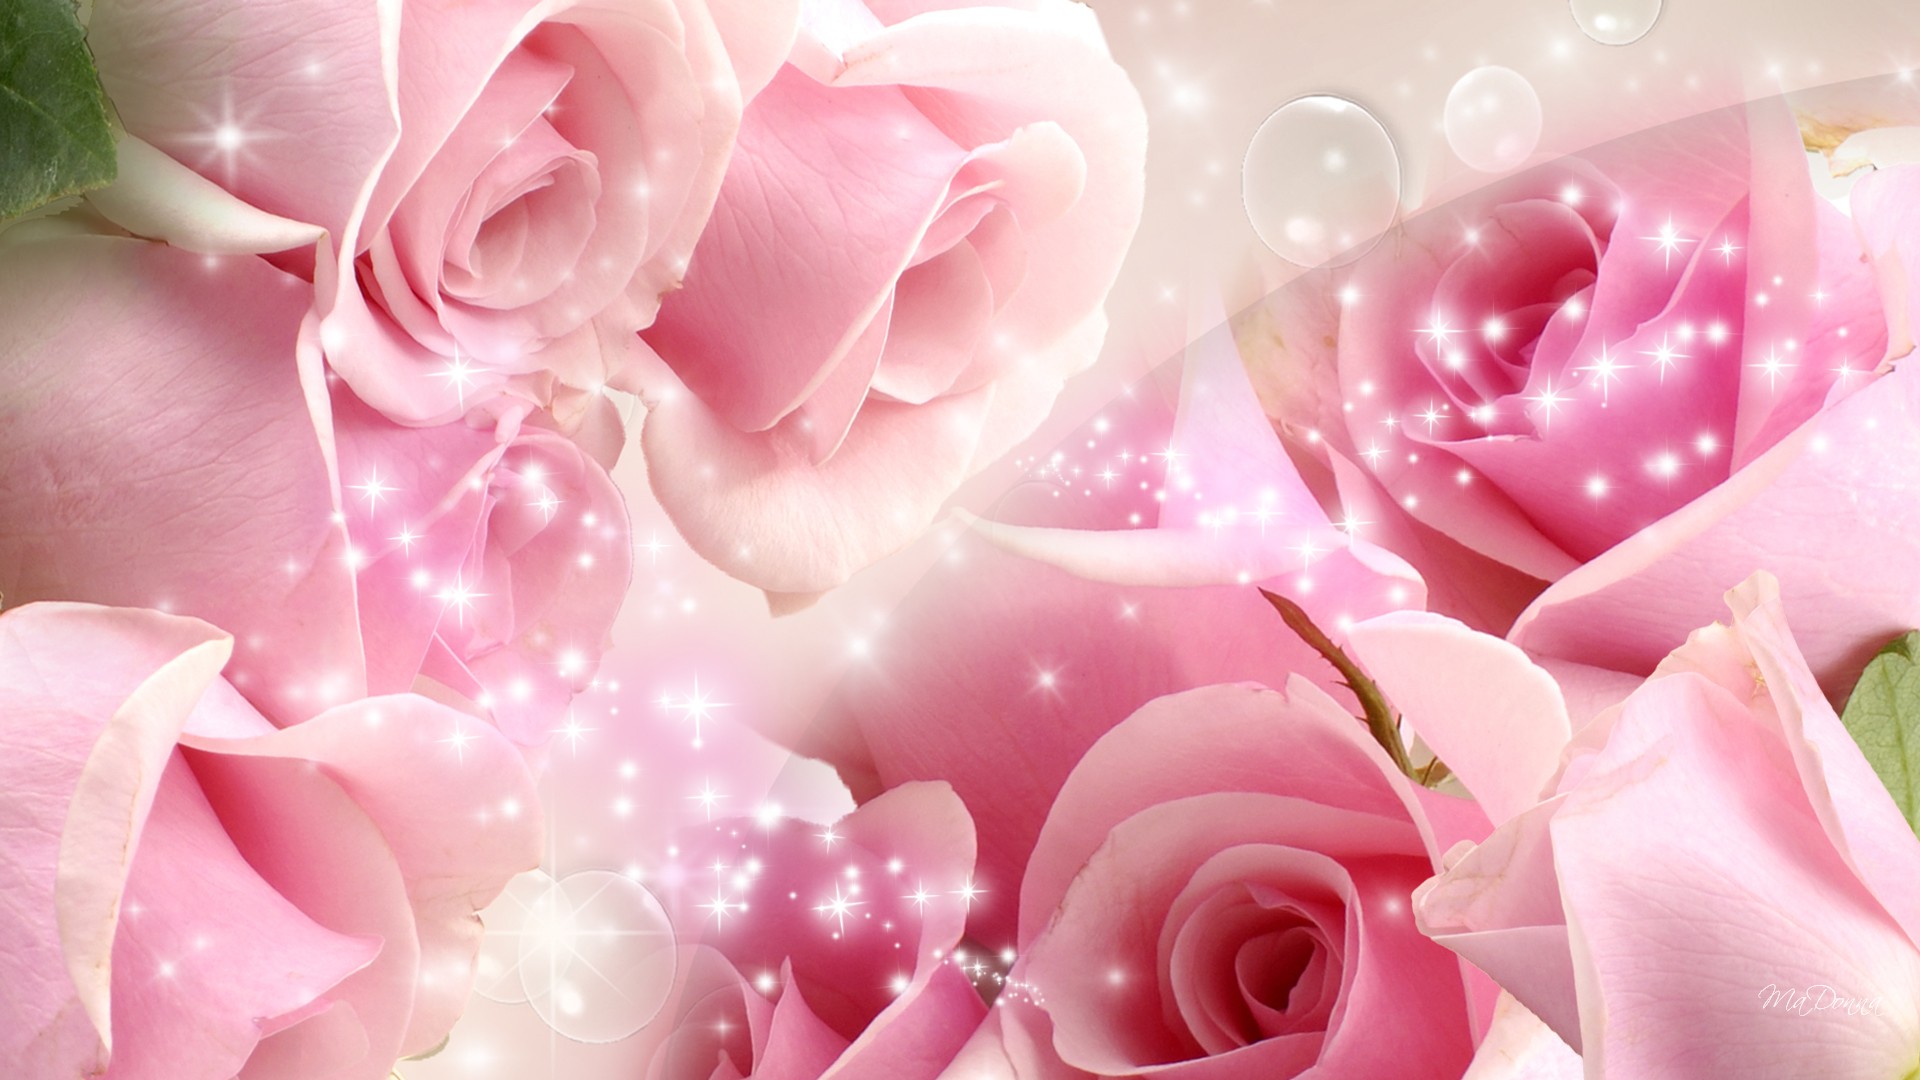 Flower Wallpaper Hd Images Best Of Love And Warmth - Rose Pink Flower Background Hd - HD Wallpaper 